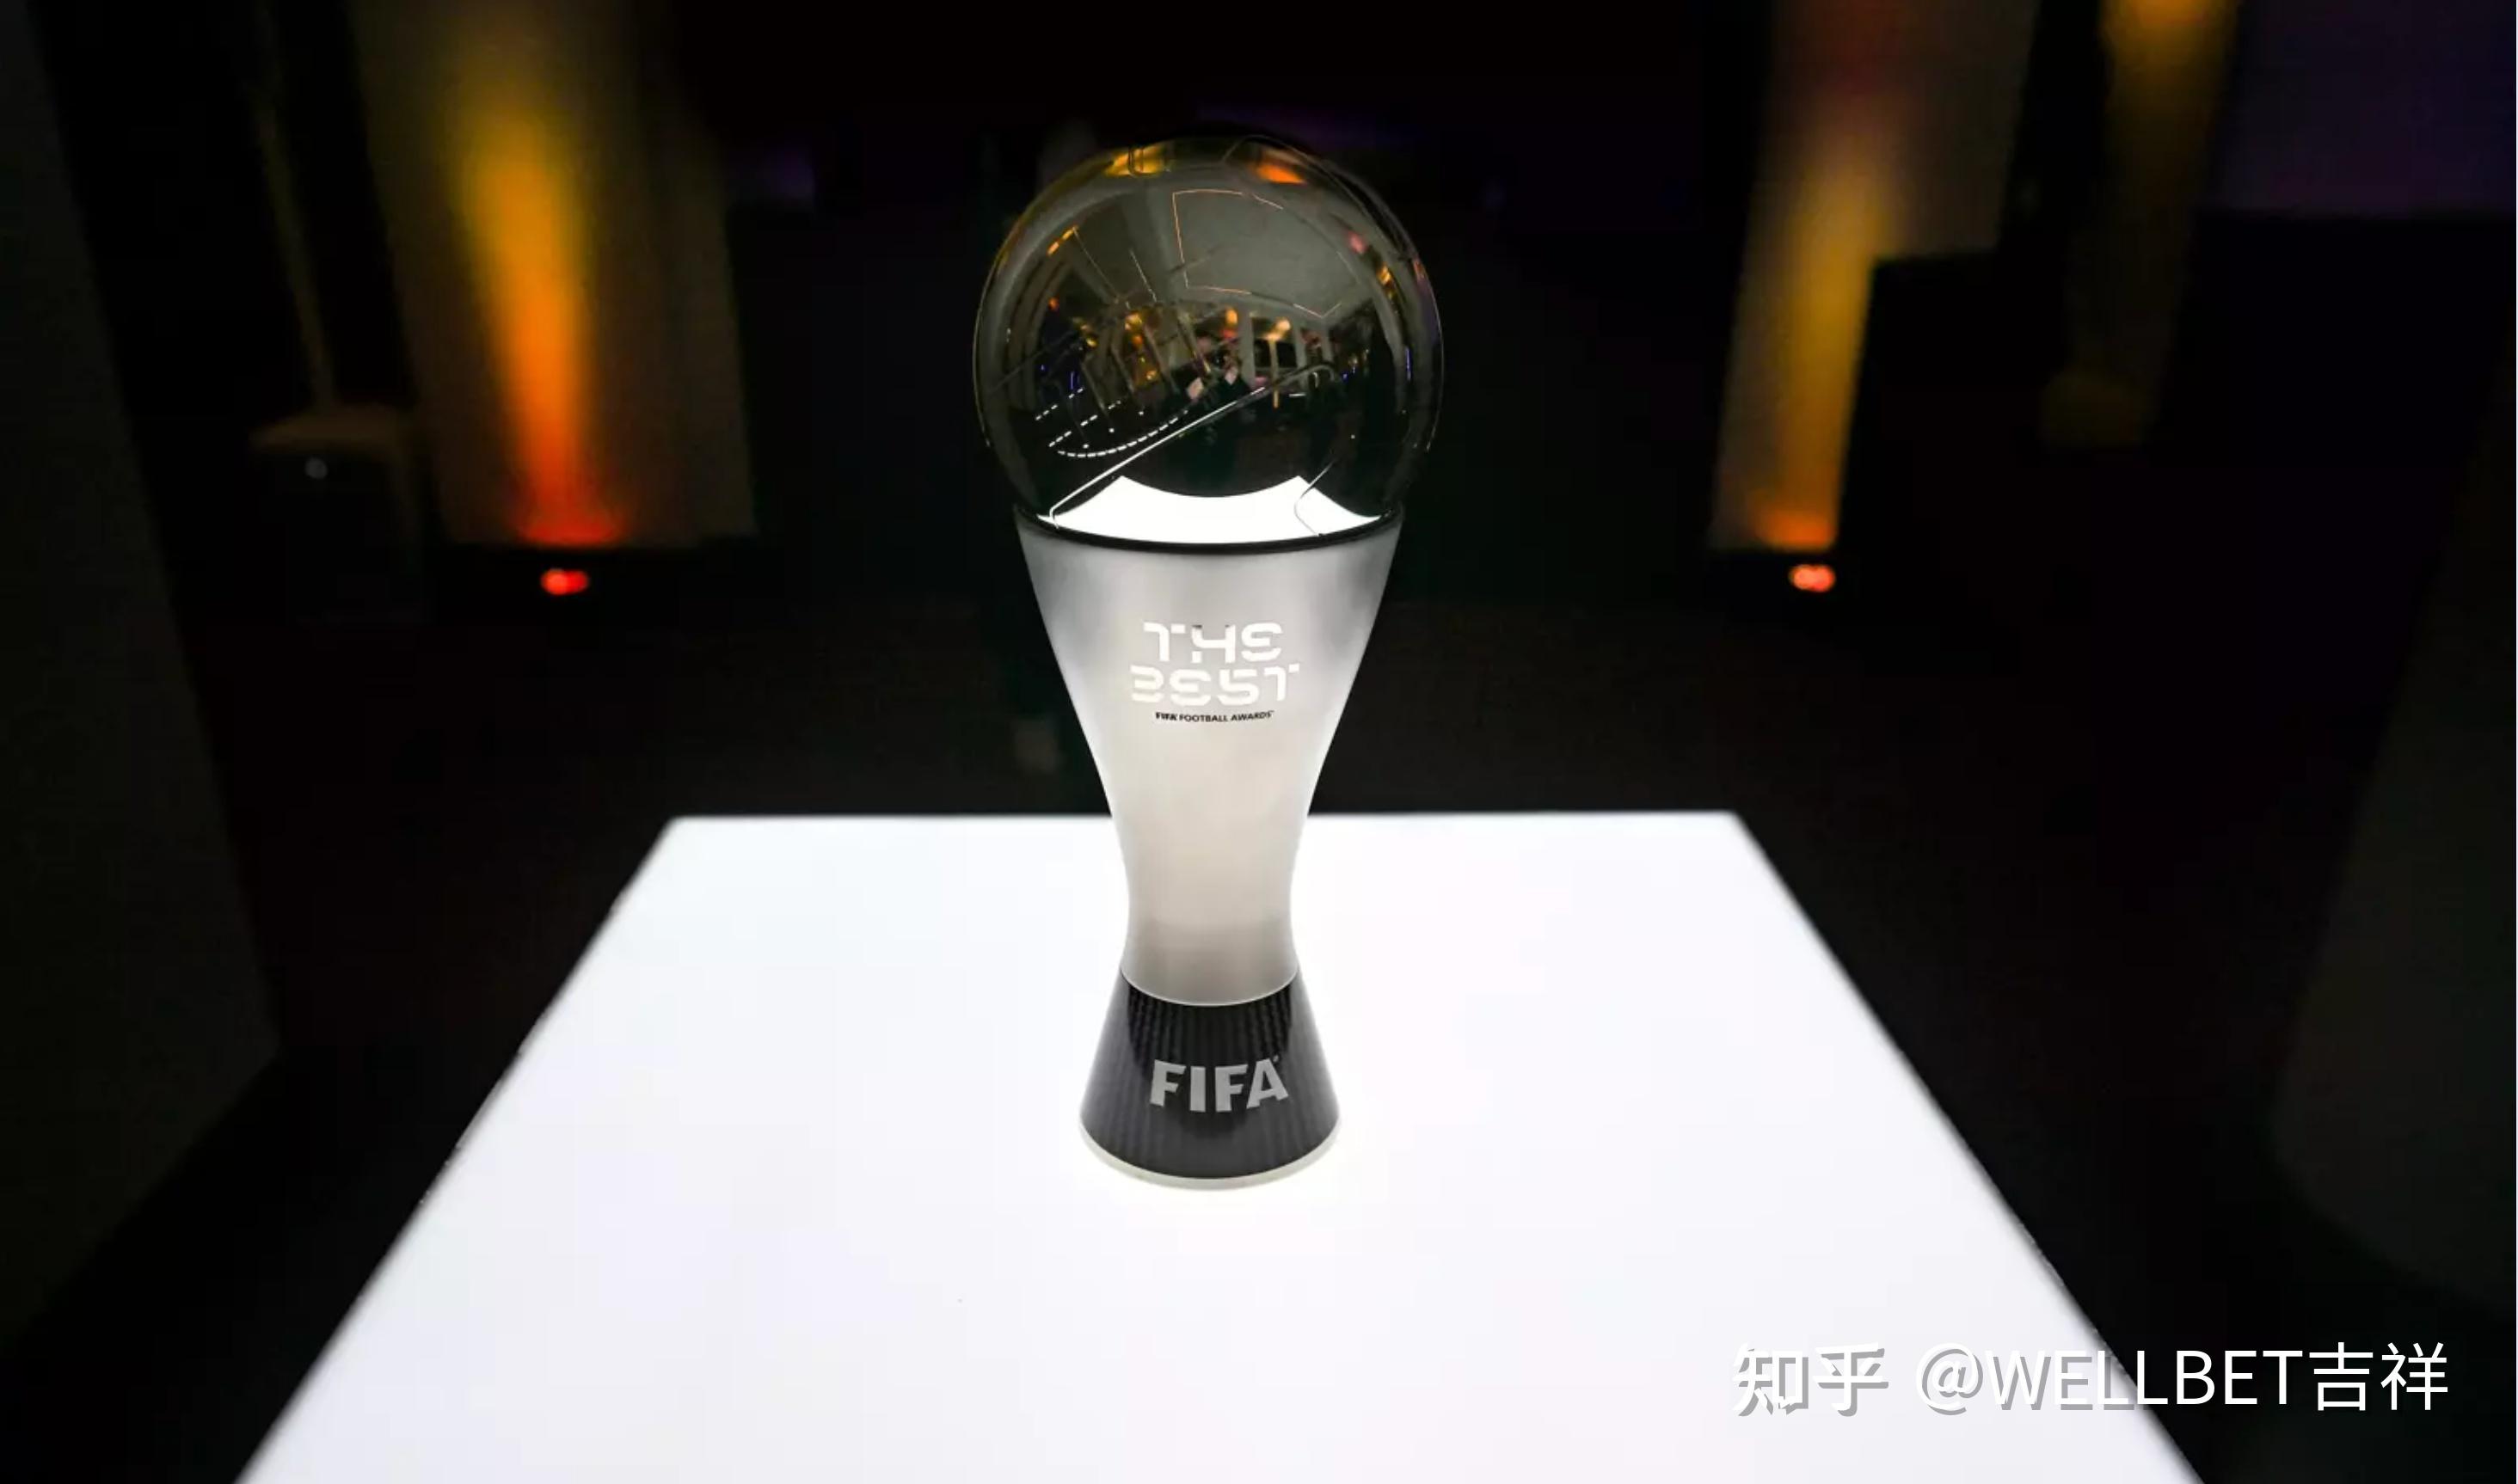 Wellbet Auspicious Sports Information-2023 FIFA Best Football Award will be held in London on January 15